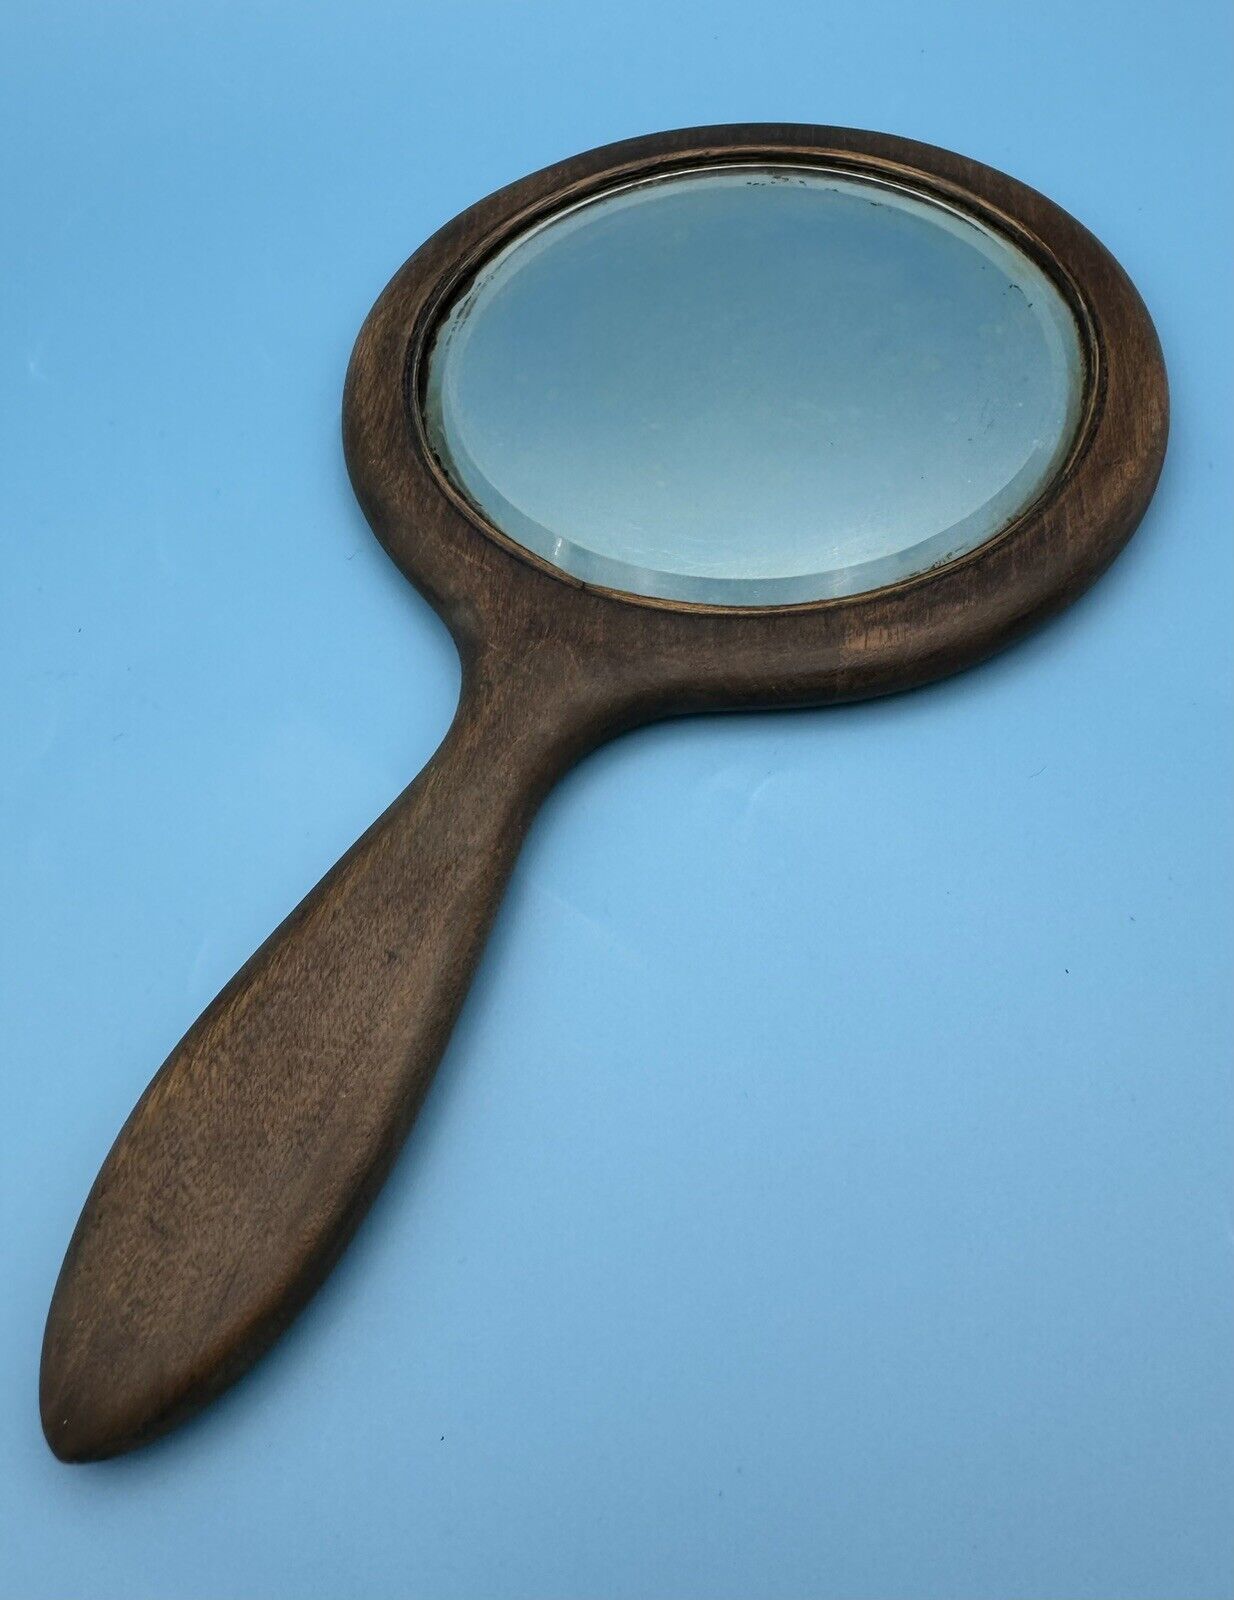 Vintage Hand Held Wooden Mirror with Beveled Glass